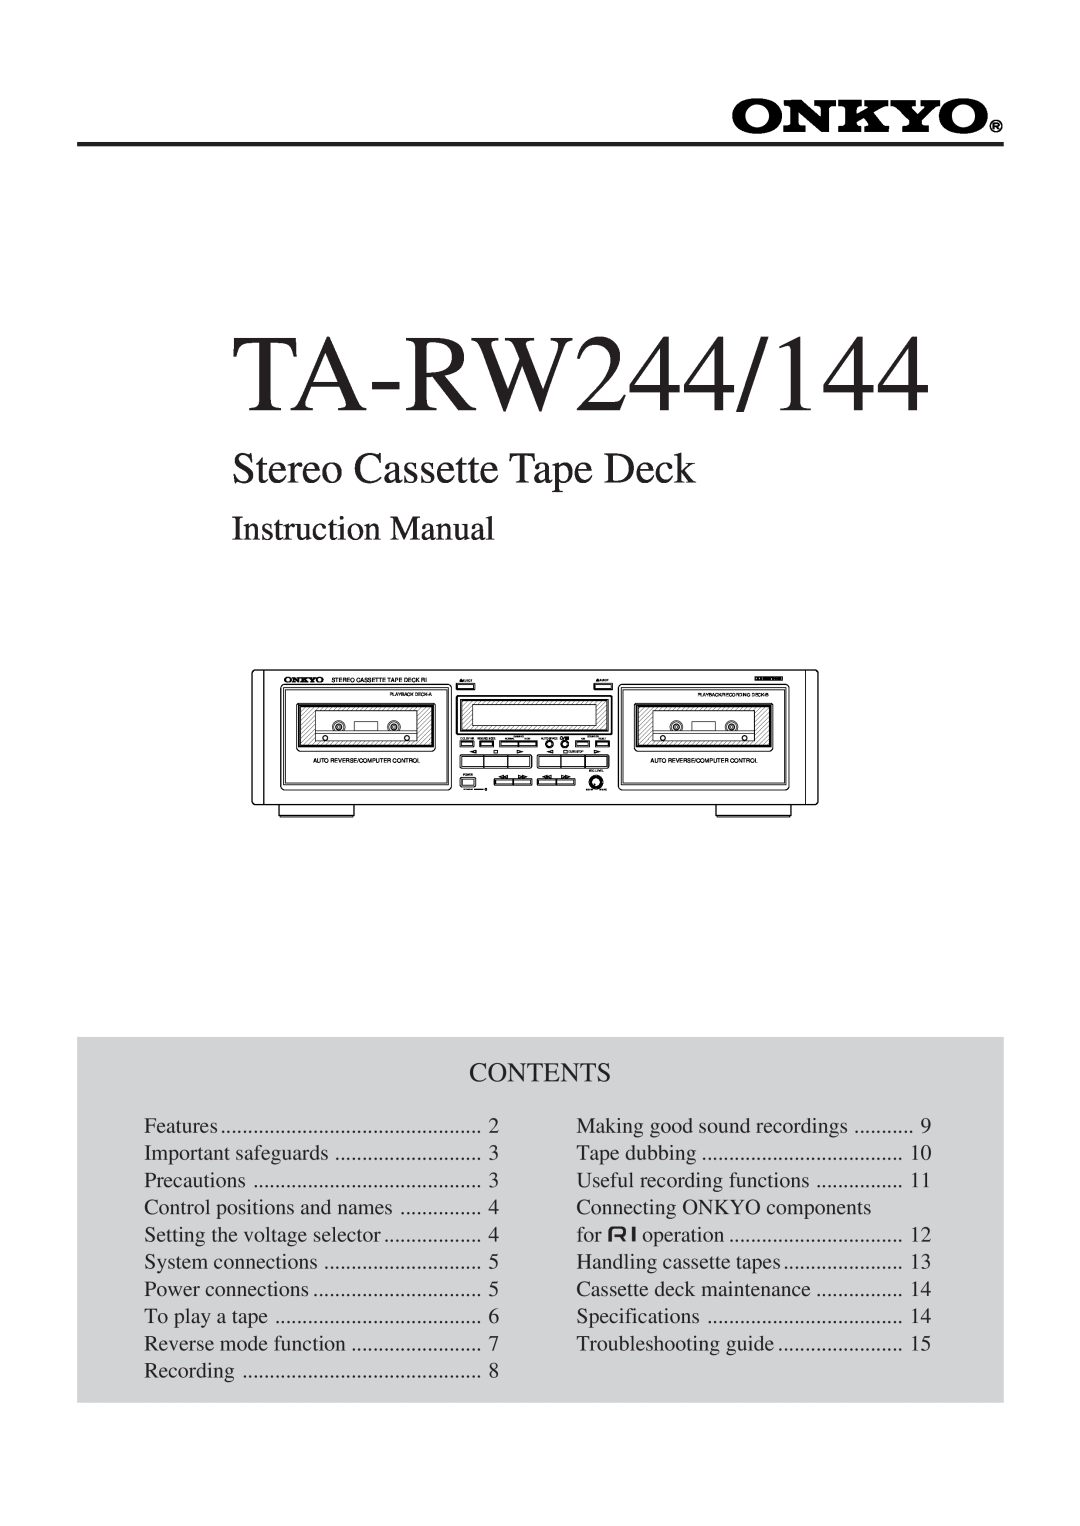 Onkyo TA-RW244/144 instruction manual Stereo Cassette Tape Deck, Contents 